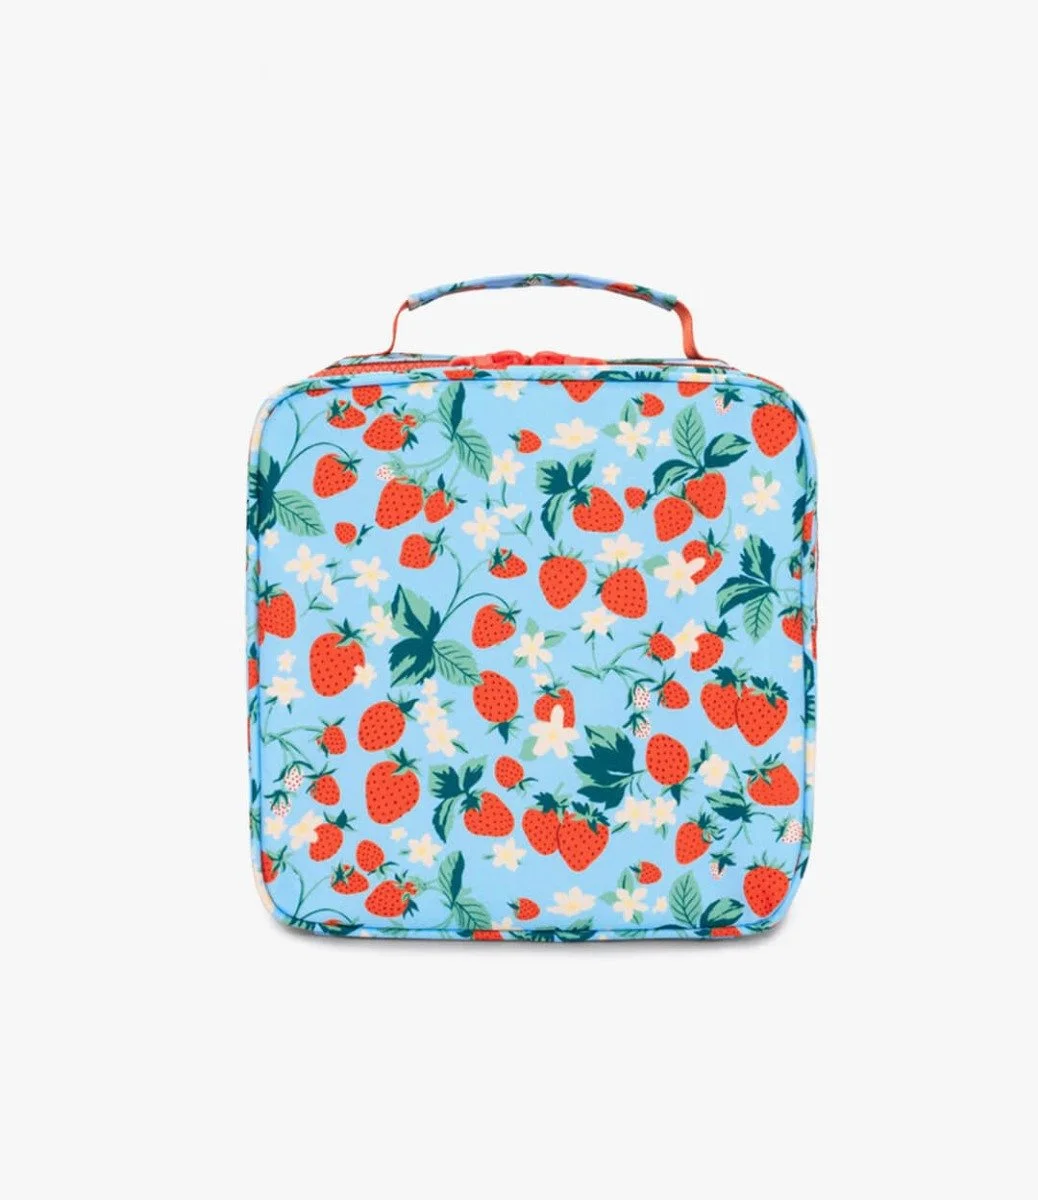 What's For Lunch? Lunch Bag, Strawberry Field by Ban.do